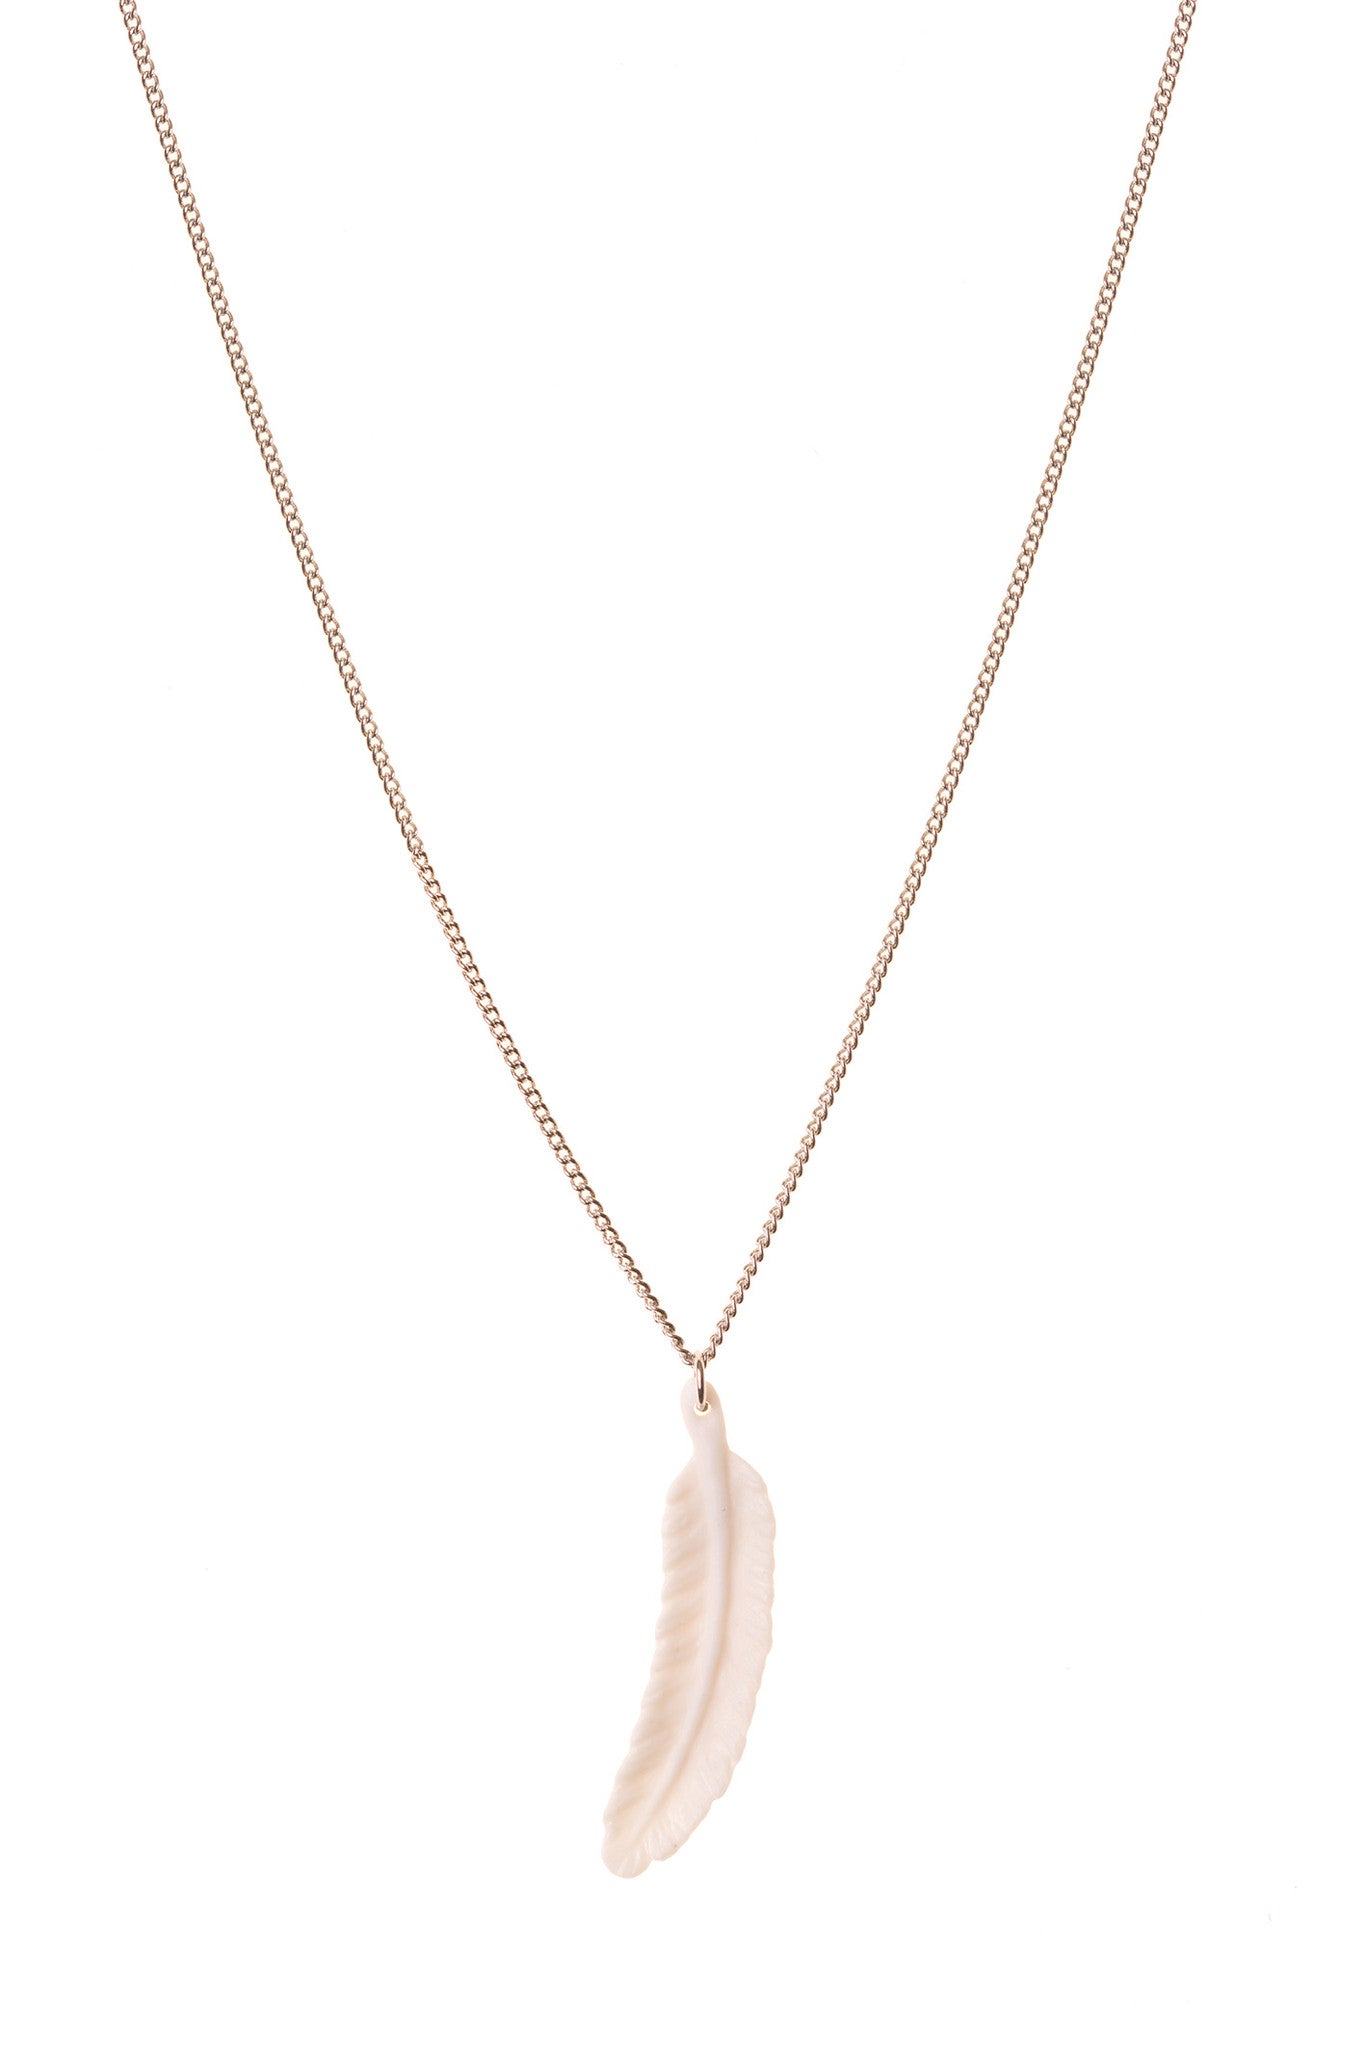 Autumn Sale - Small White Feather Necklace